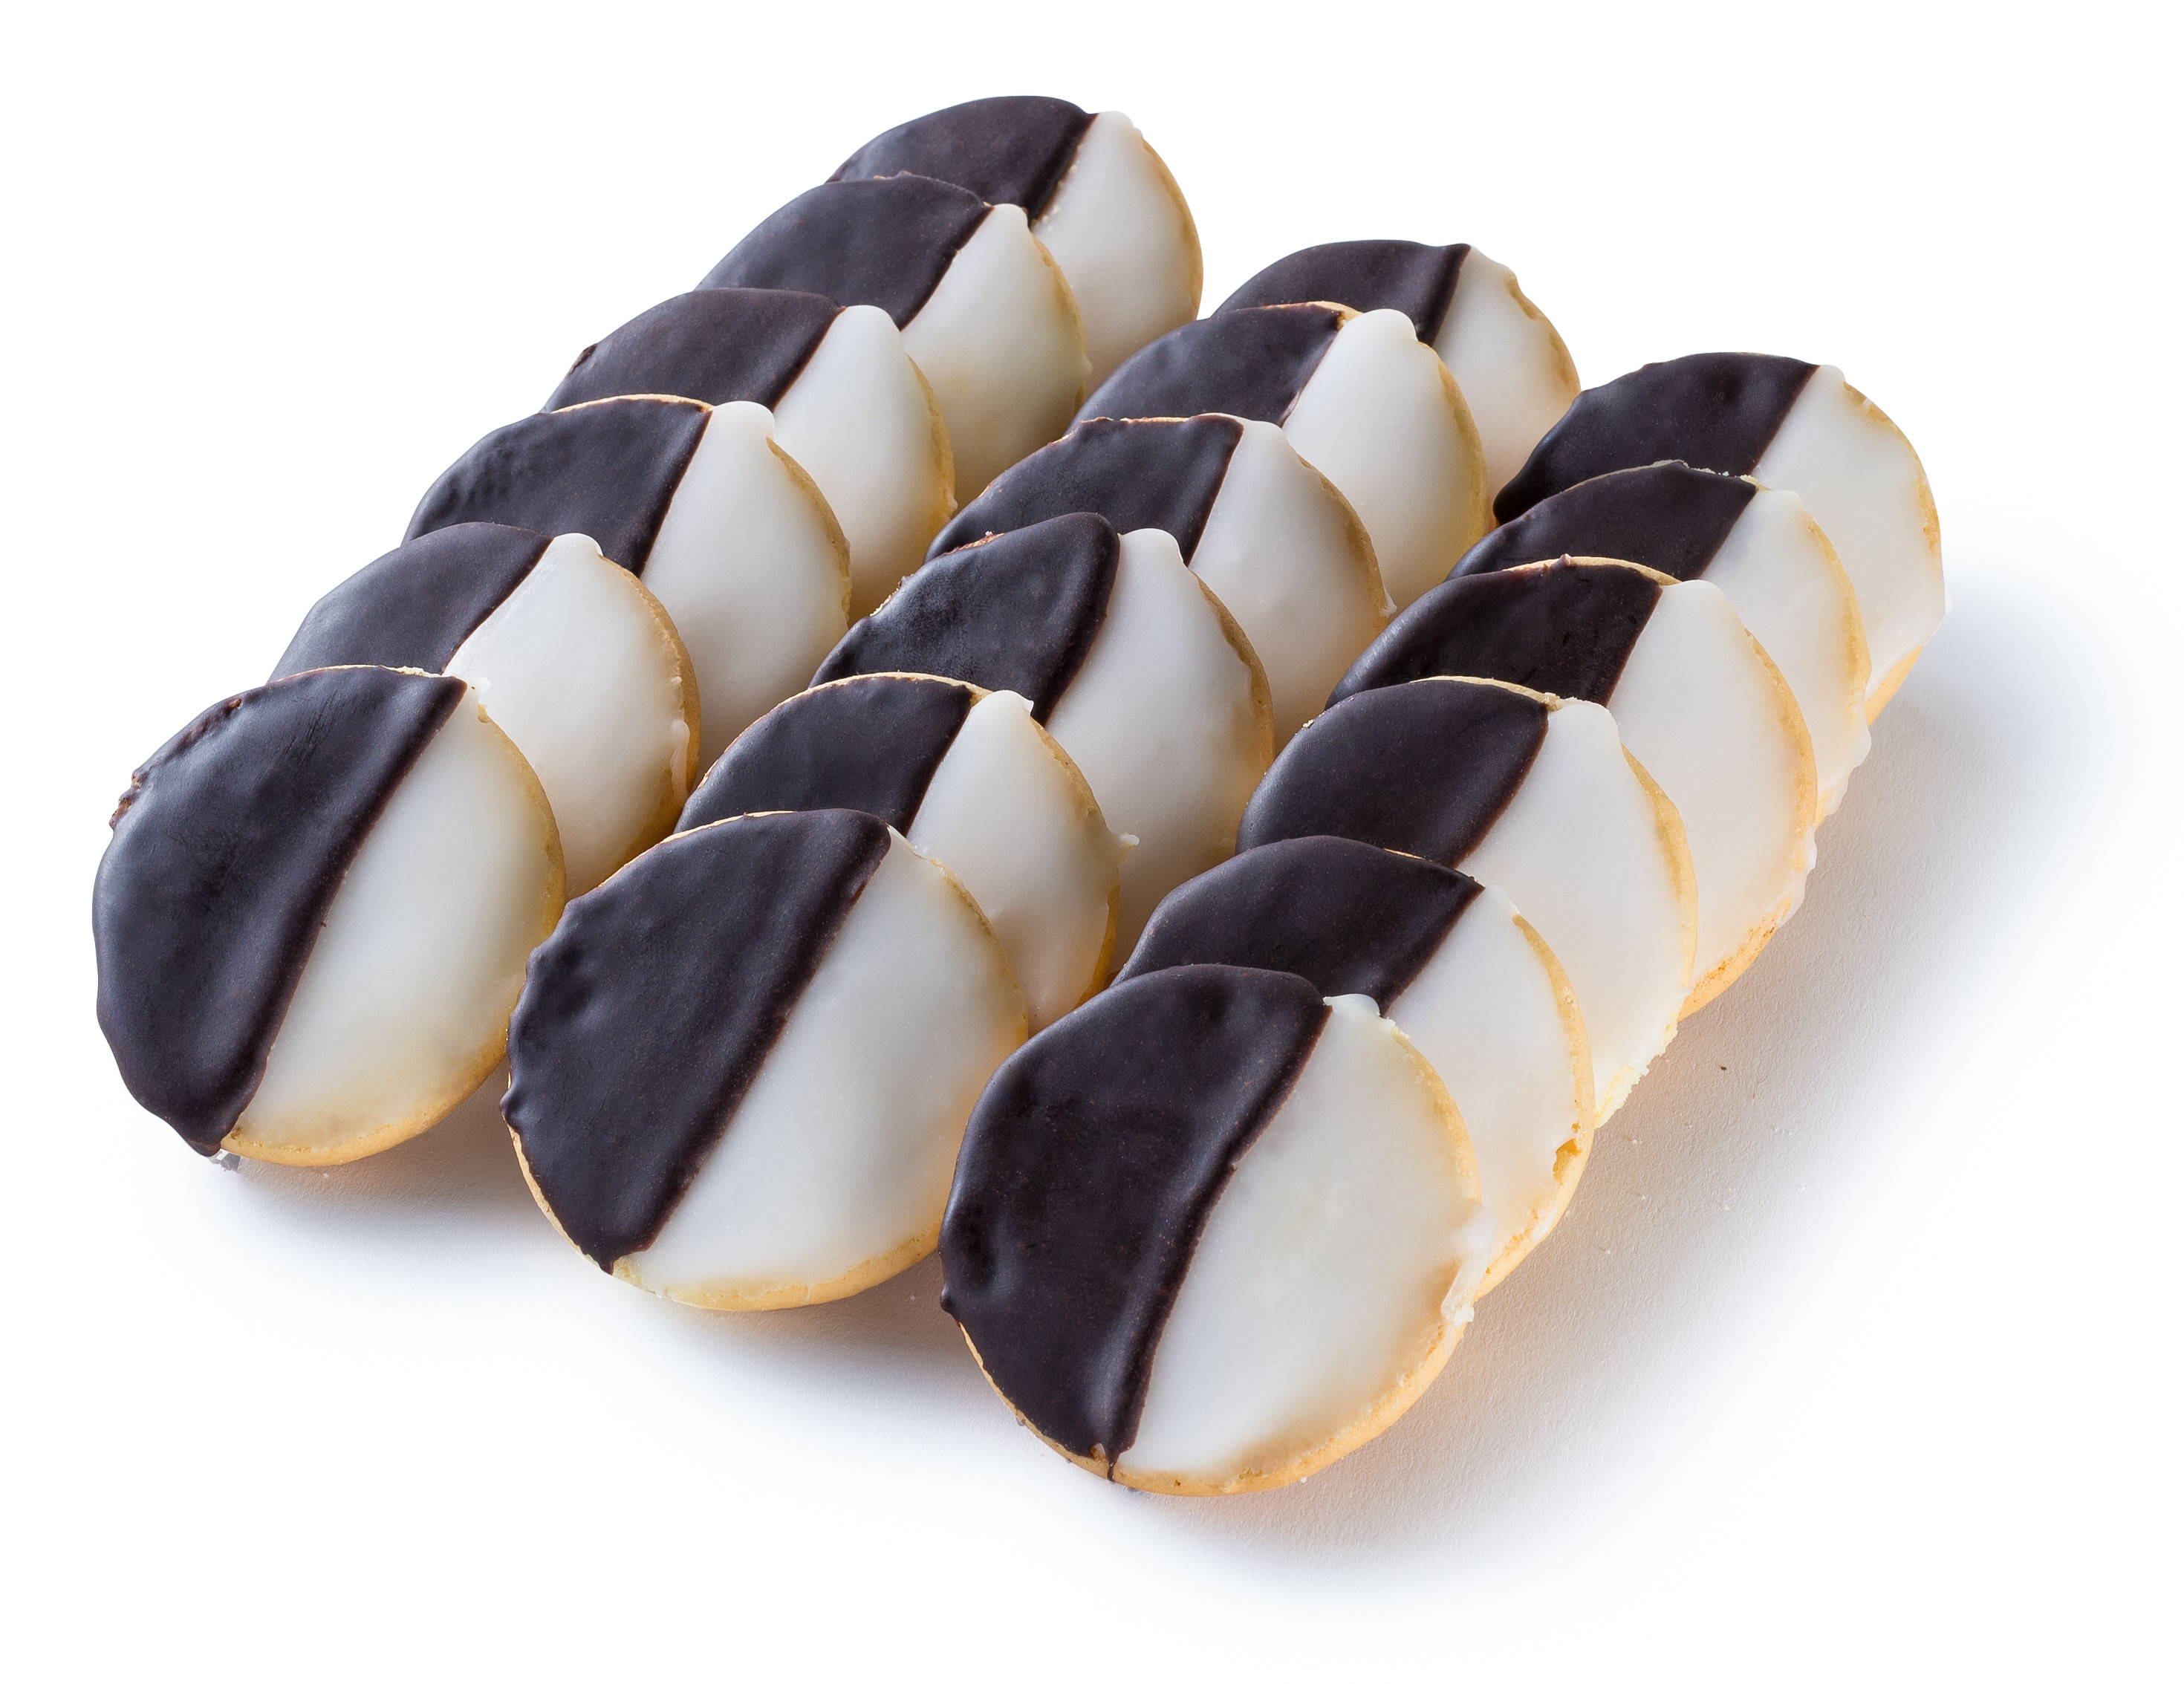 Party Cookies|18 Black & White Homemade Cookies| Pick your choice of Color